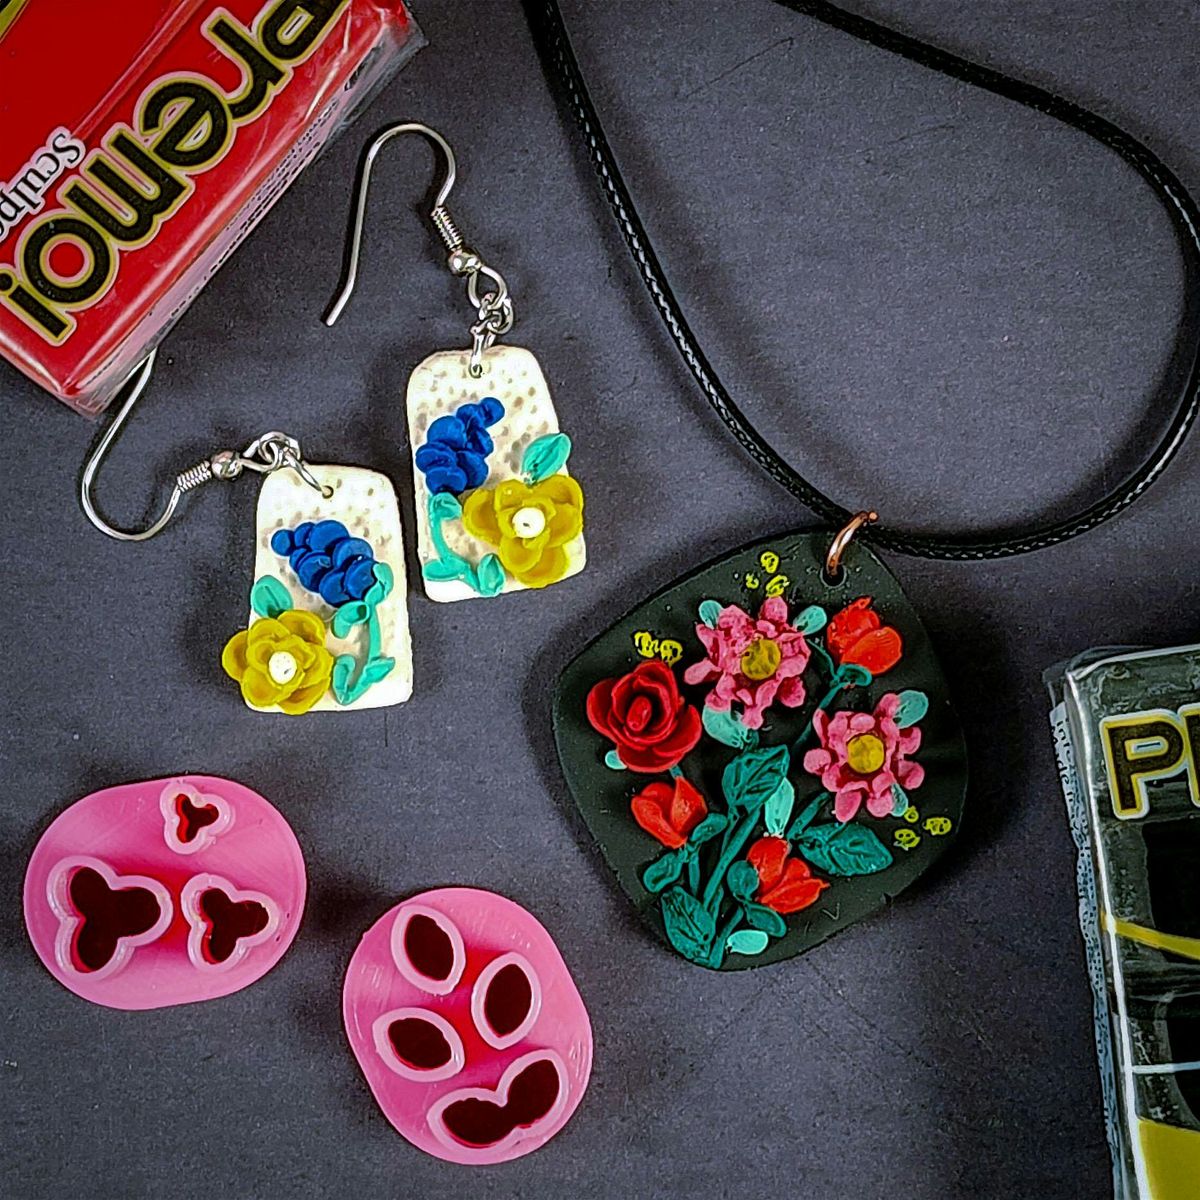 Make your own Polymer Clay Jewelry